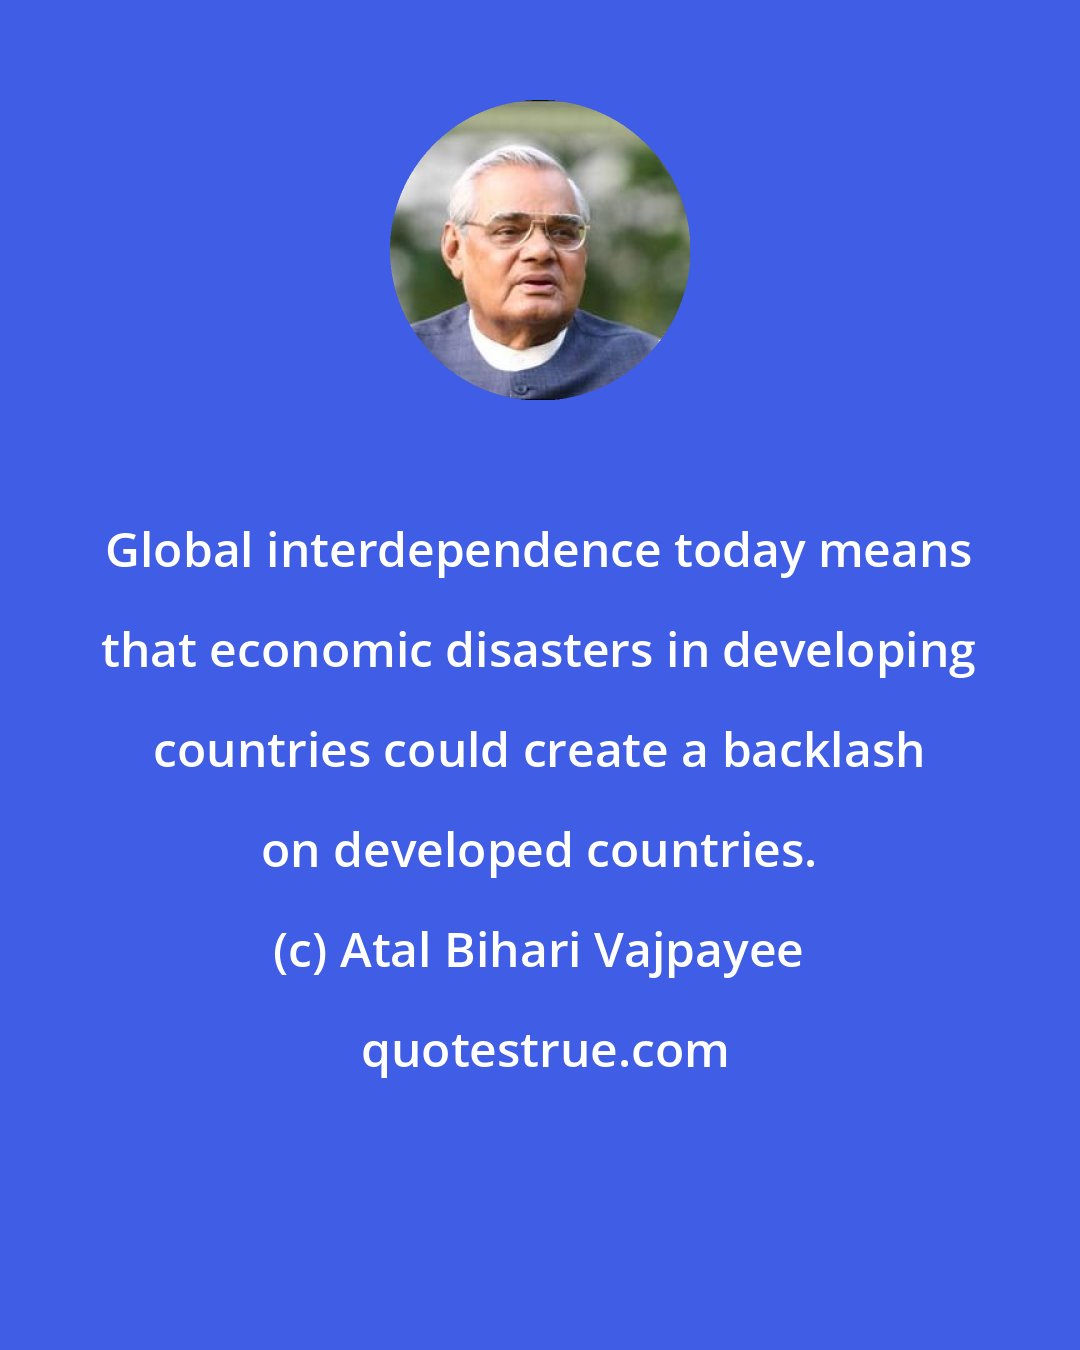 Atal Bihari Vajpayee: Global interdependence today means that economic disasters in developing countries could create a backlash on developed countries.